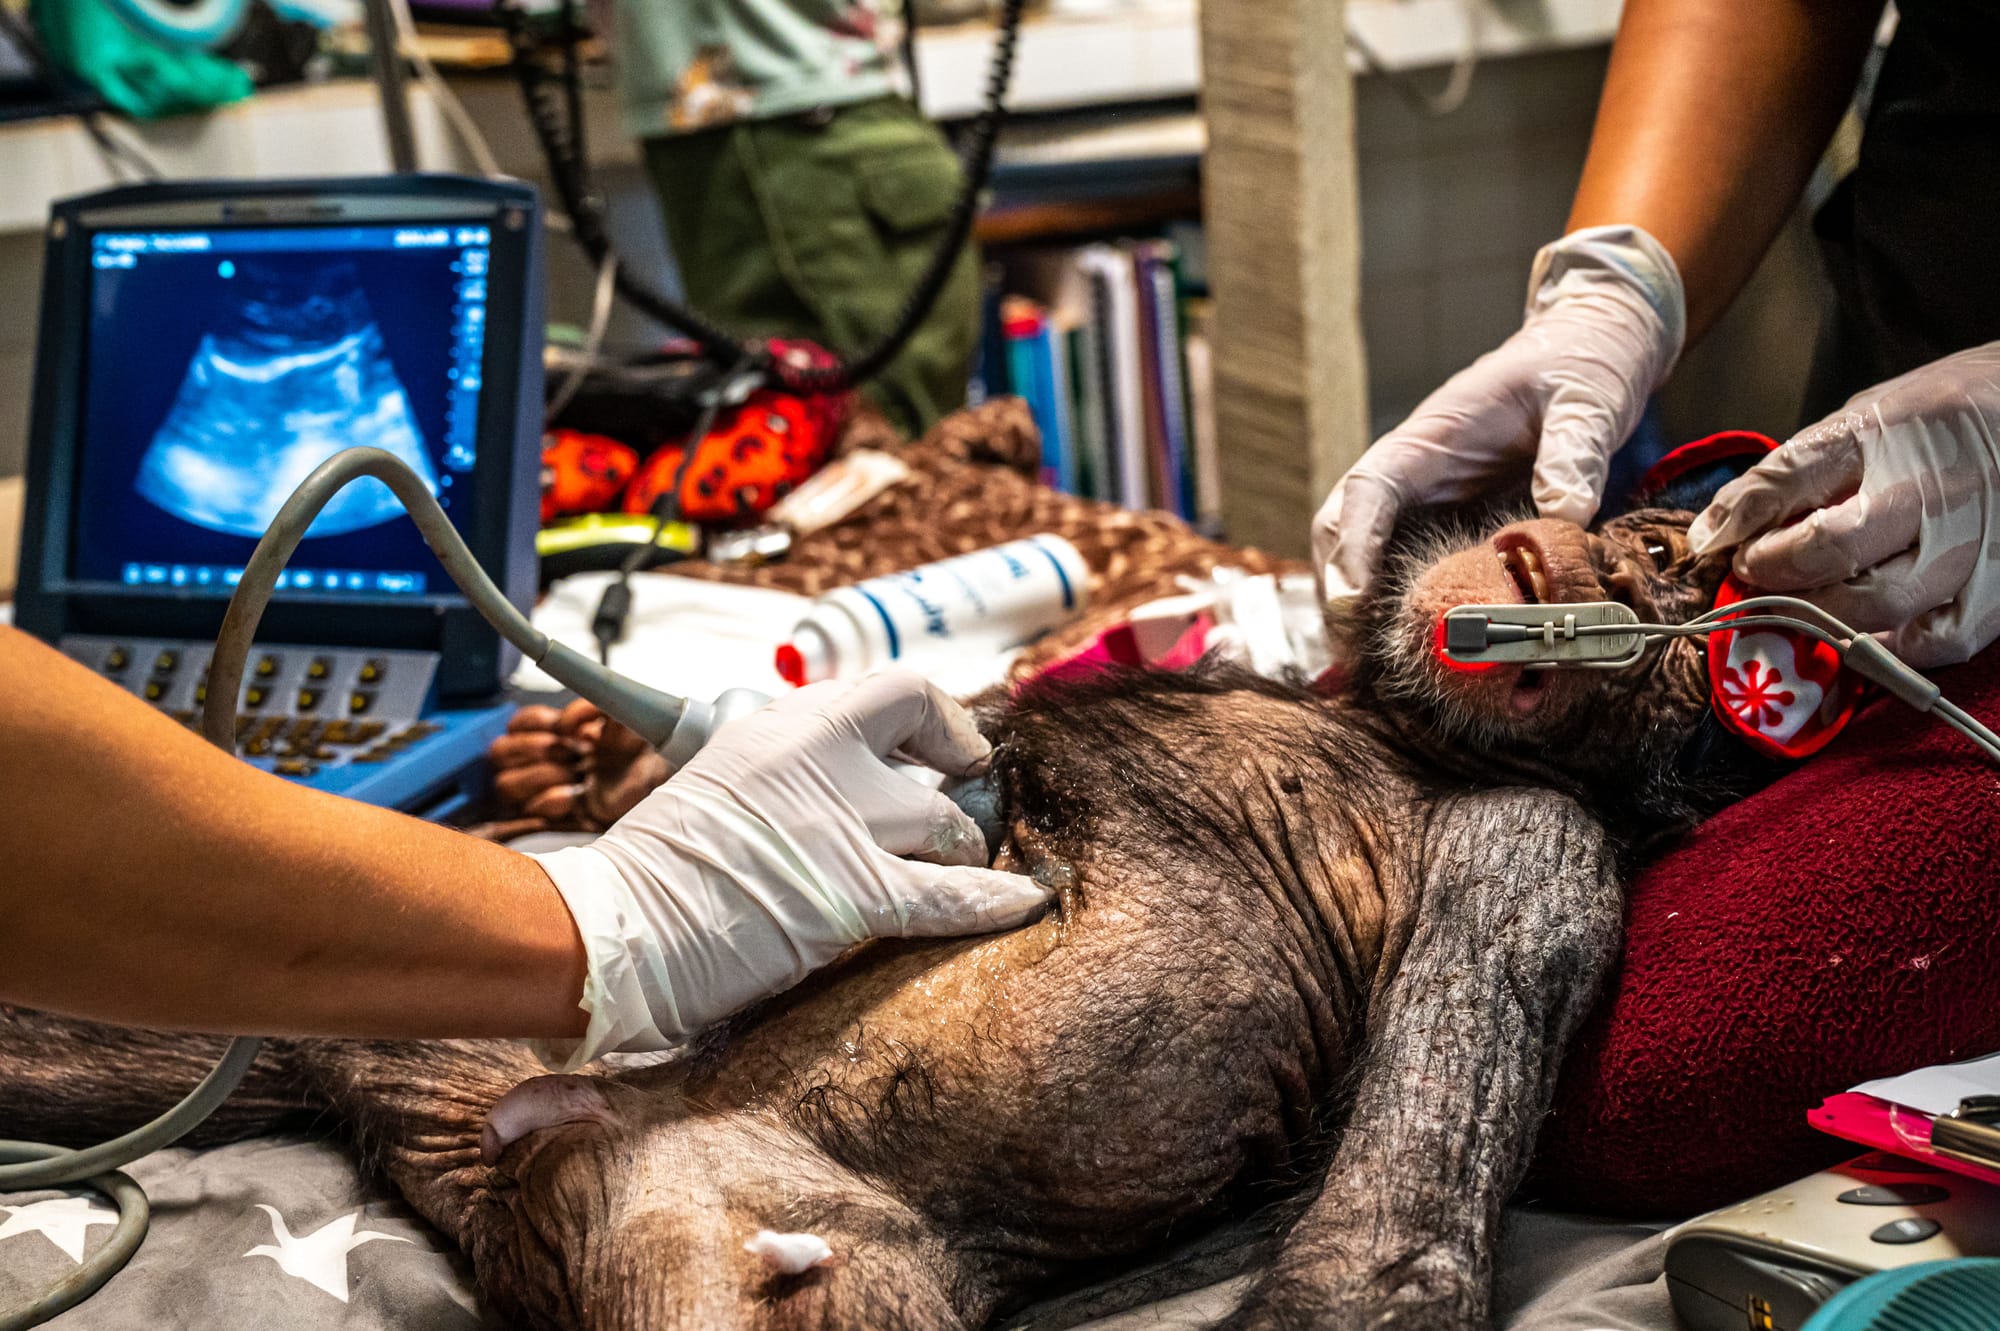 a chimpanzee receiving medical treatment care from doctors